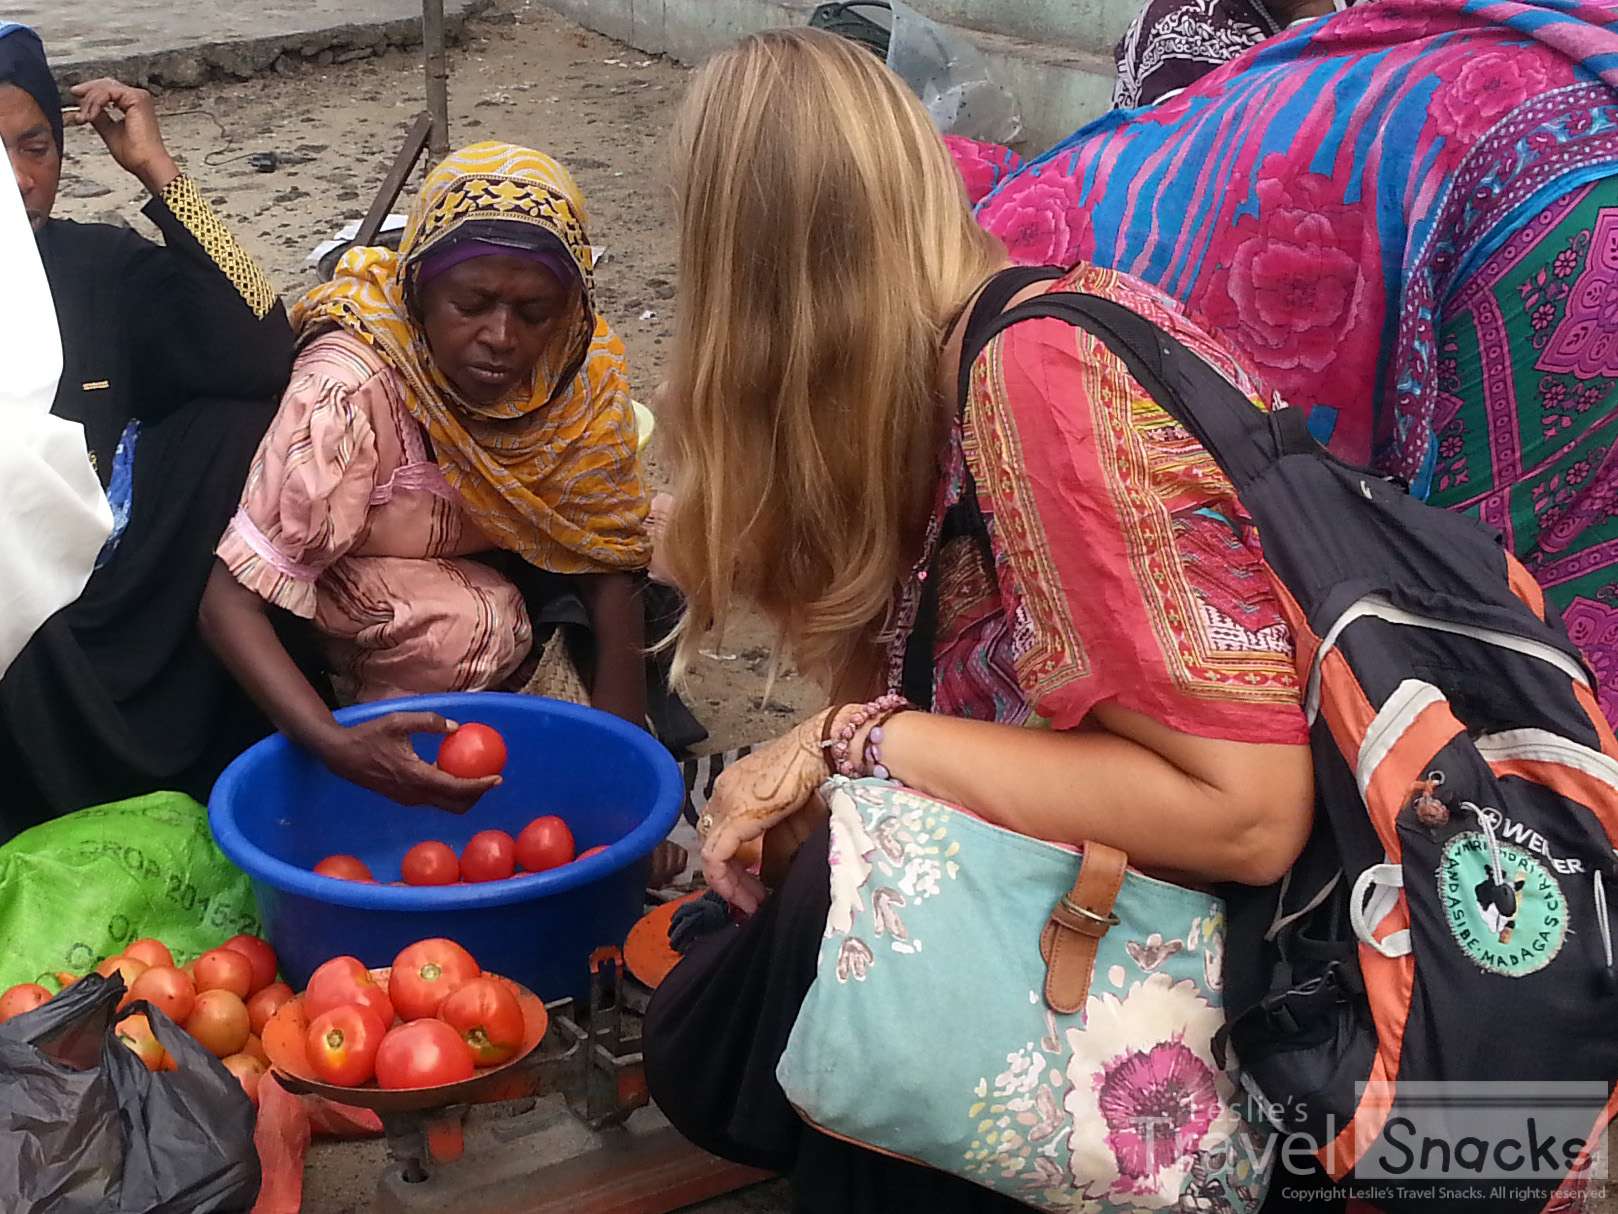 Haggling for a couple of kilos of tomatoes in Africa.